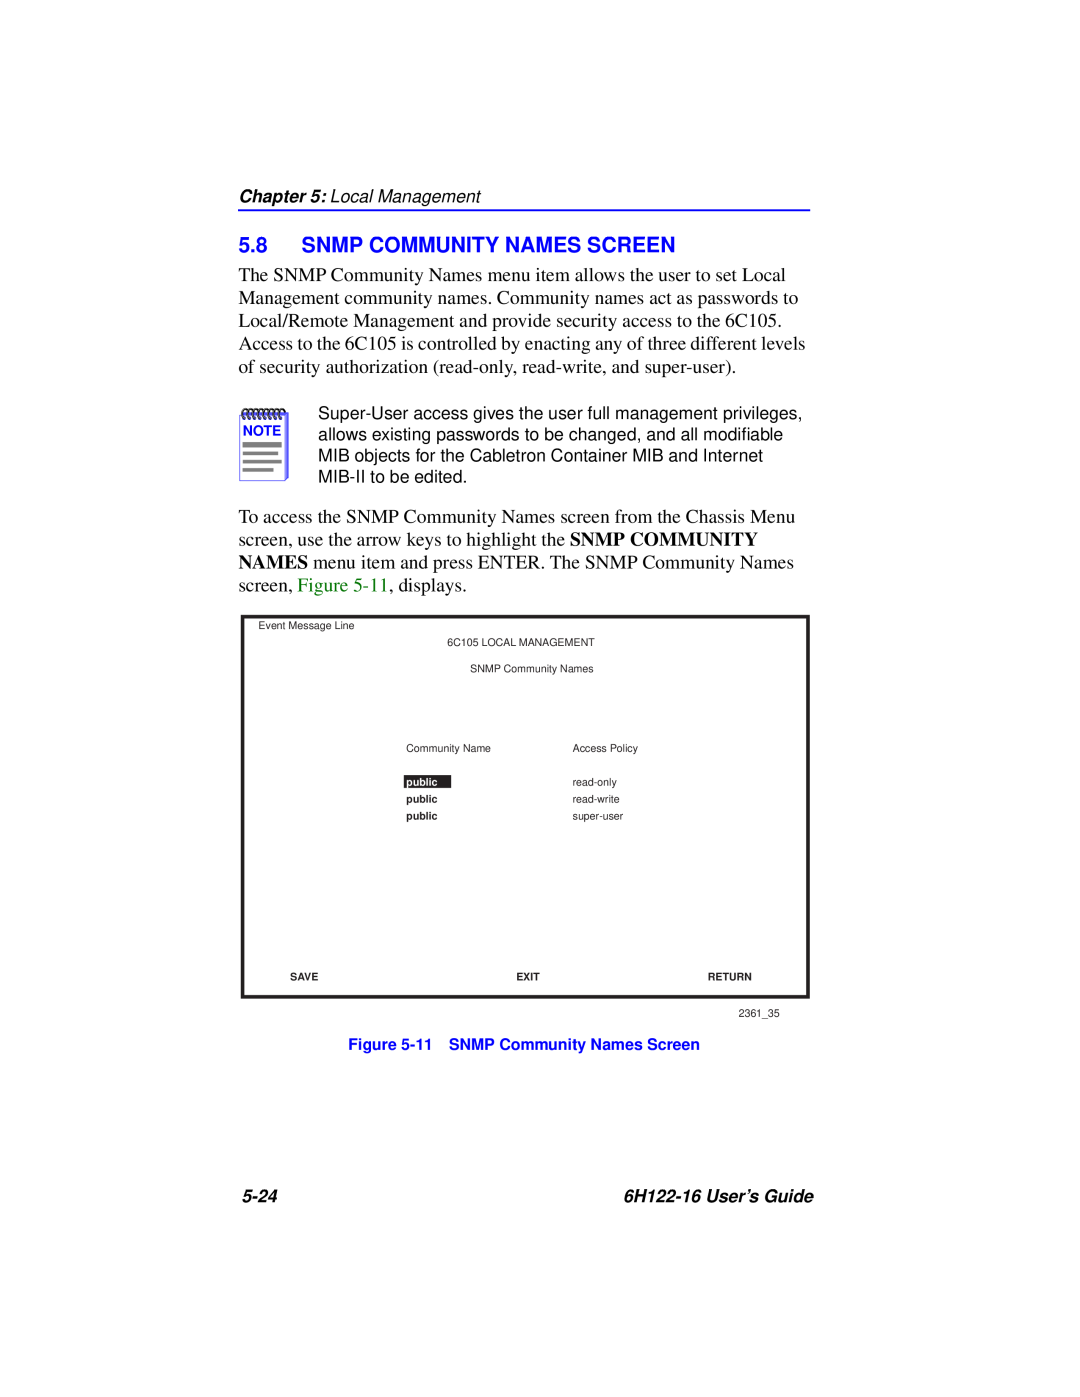 Cabletron Systems 6H122-16 manual Snmp Community Names Screen, 11 SNMP Community Names Screen 